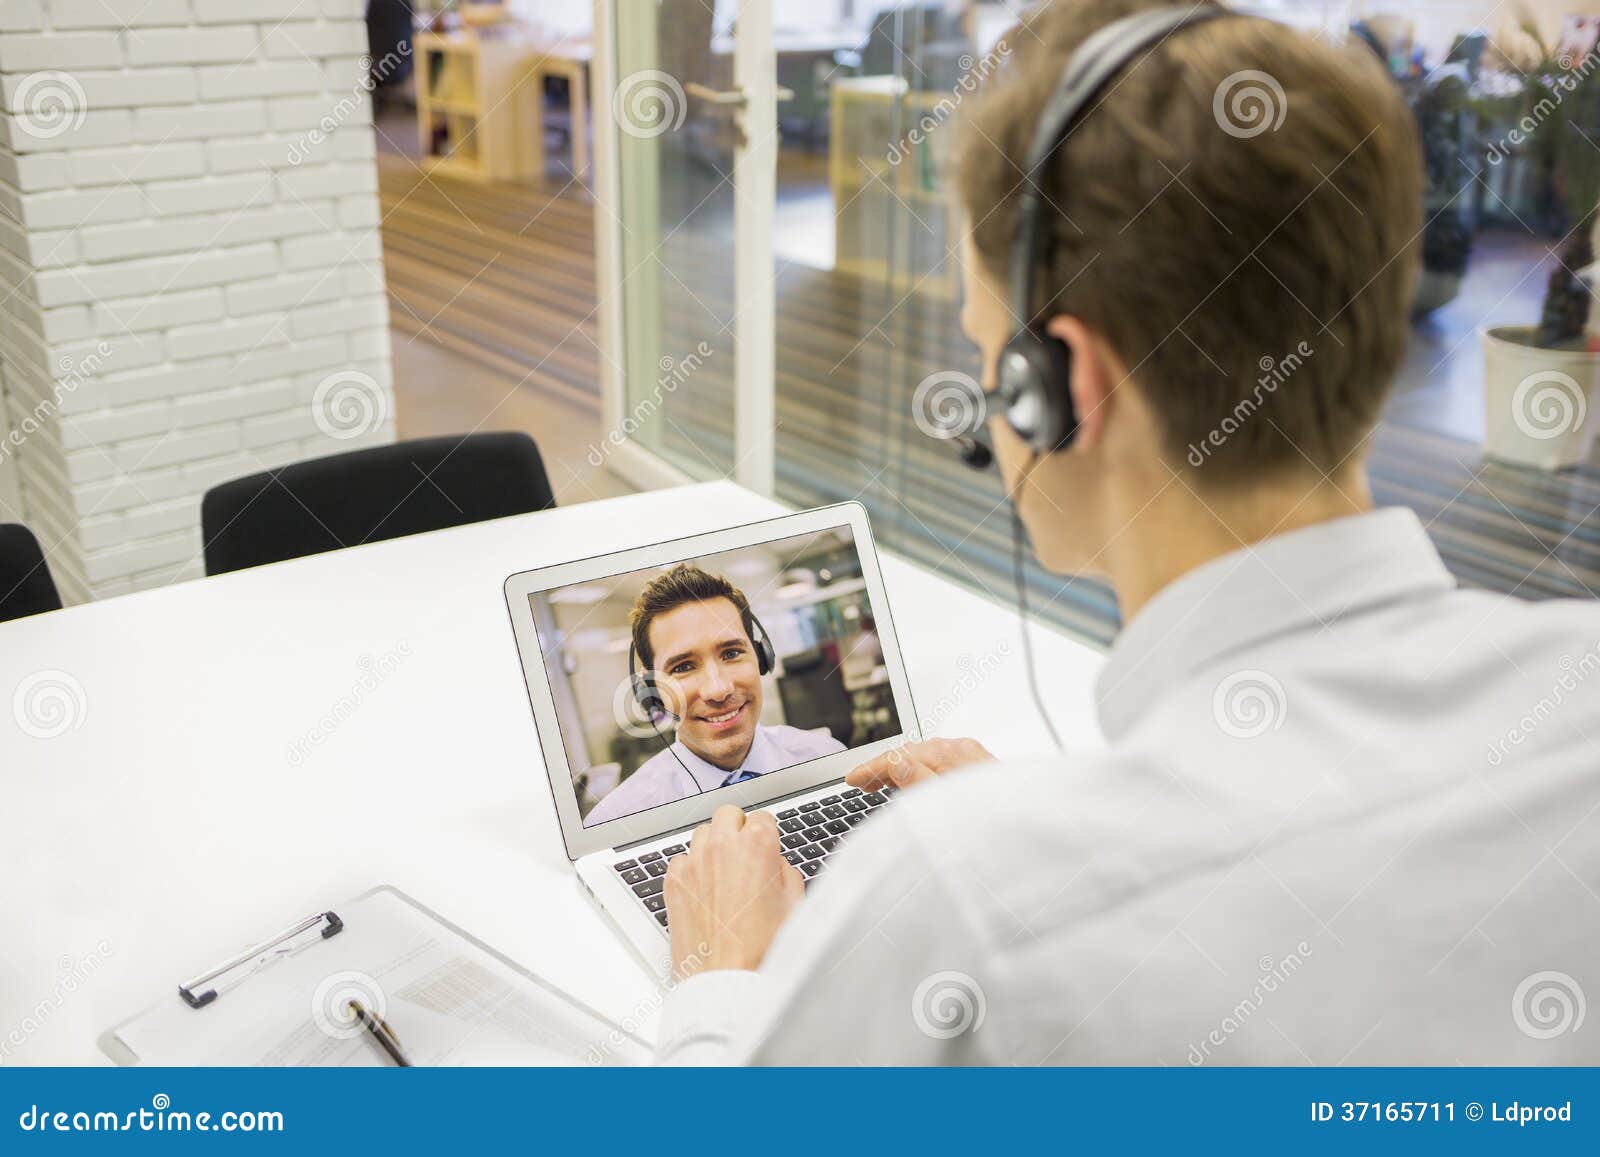 businessman in the office on videoconference with headset, skype